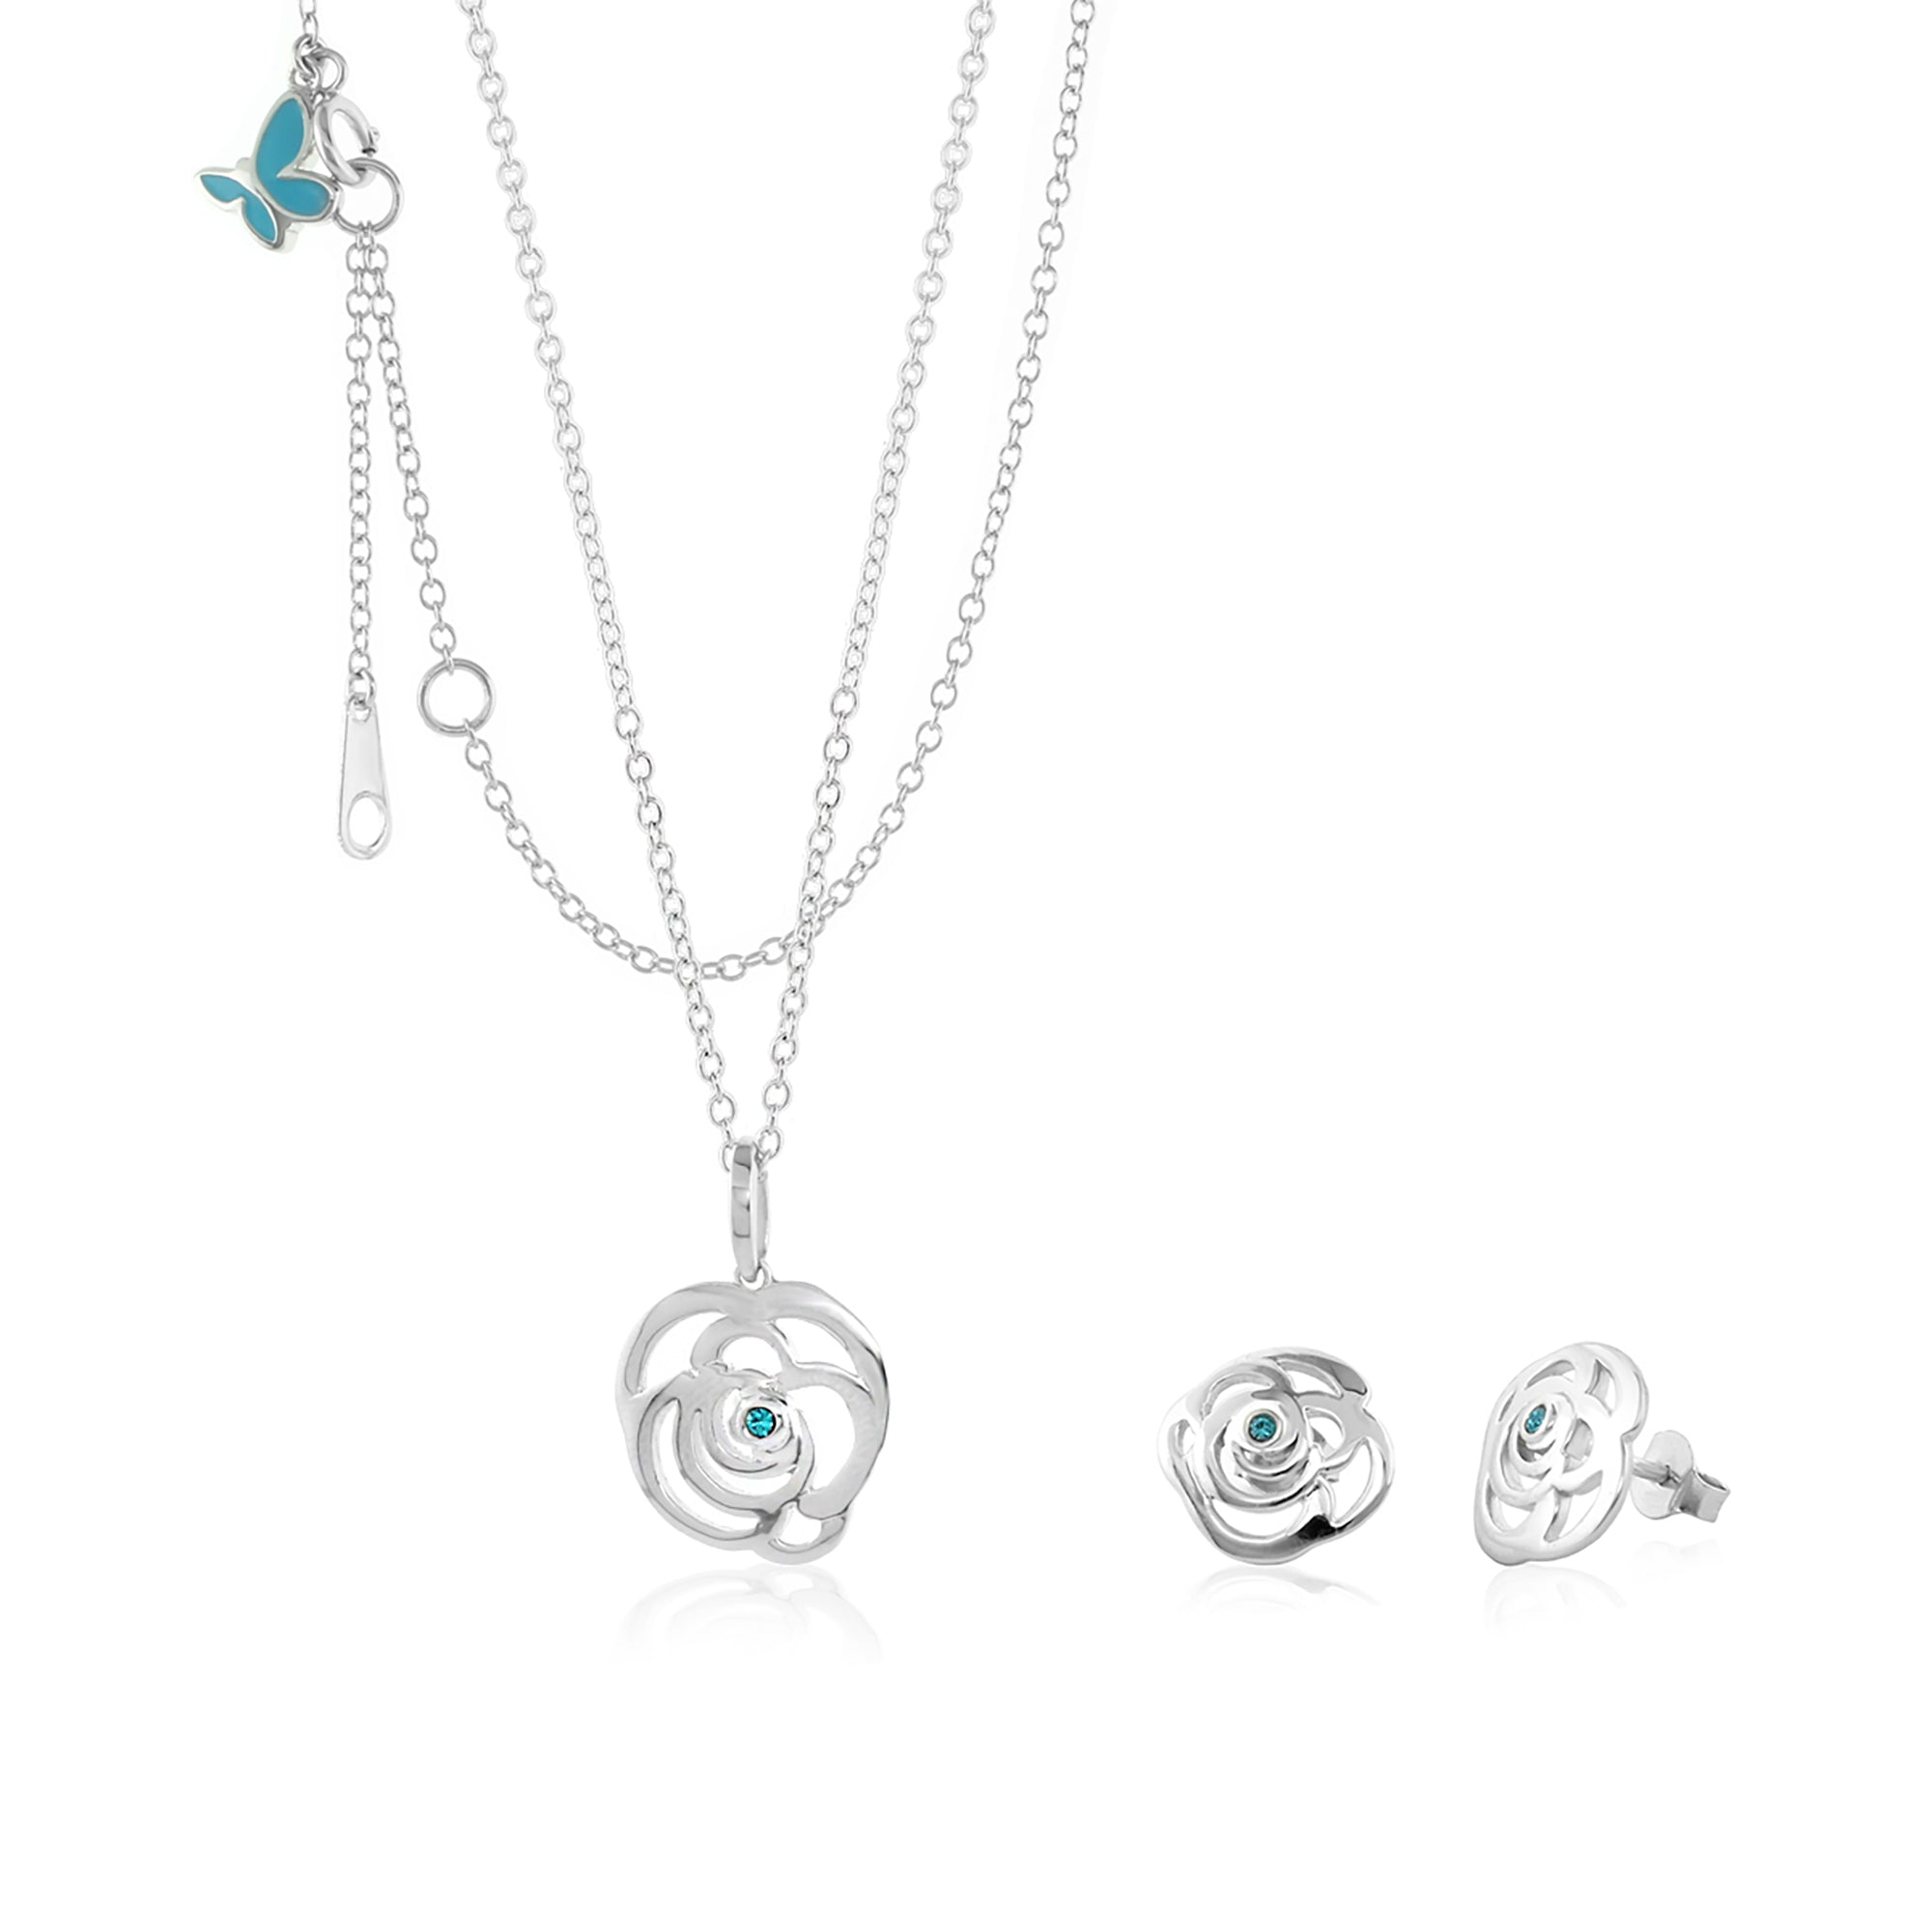 Sydney Leigh Rose Necklace & Earrings Set